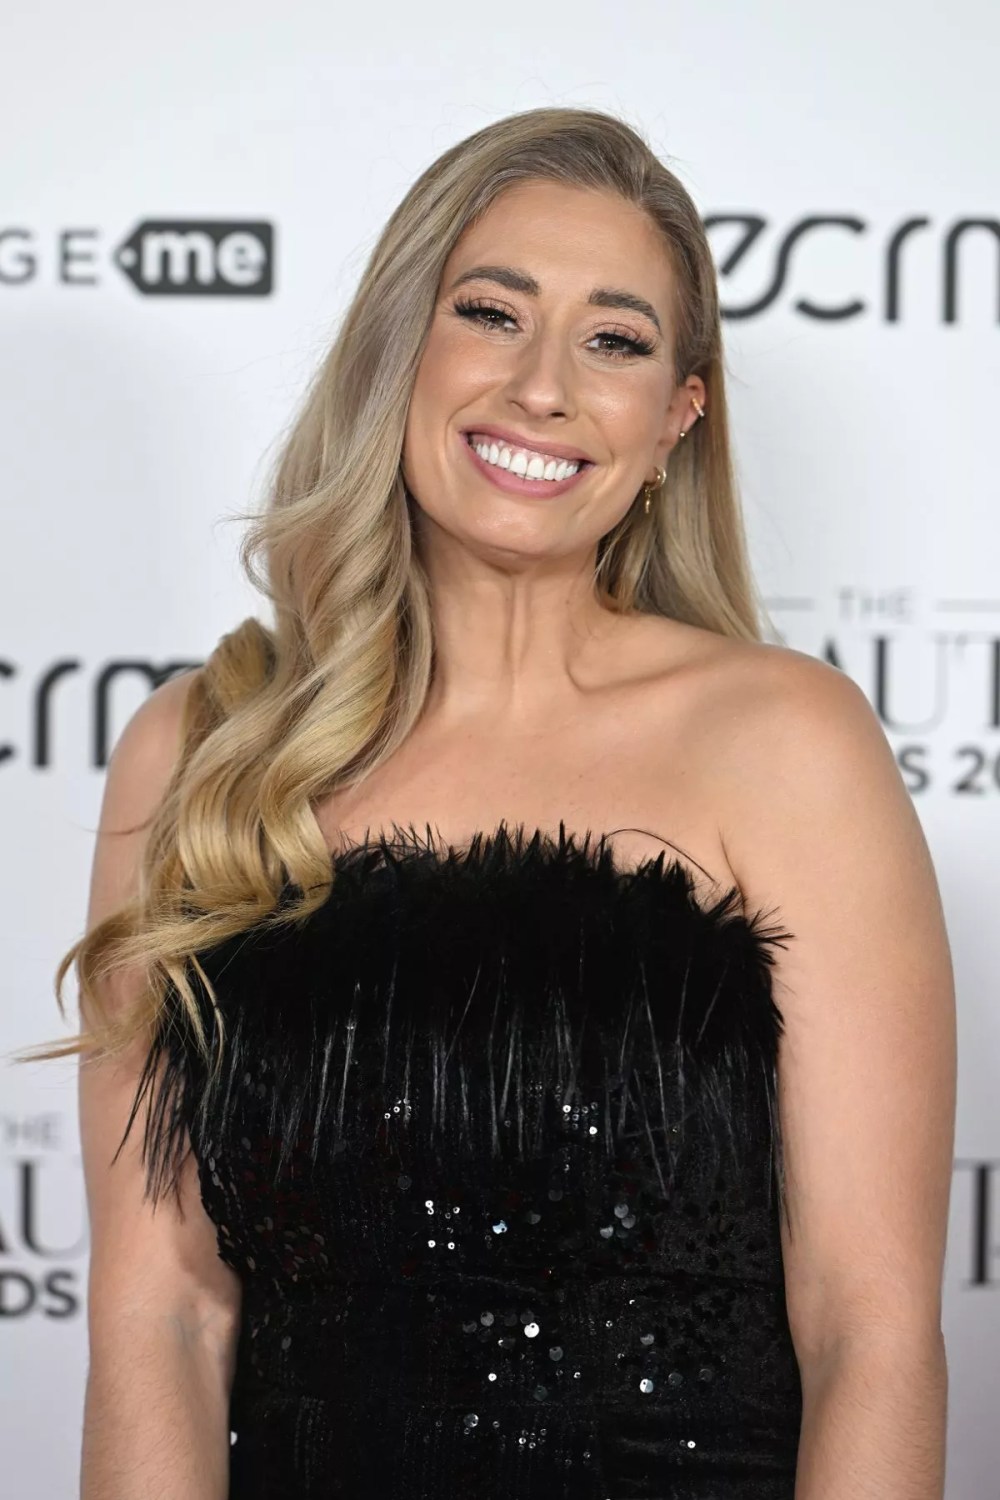 Stacey Solomon Plans To Leave The UK And Make A Mark In America, With The Support Of A Major Hollywood Figure